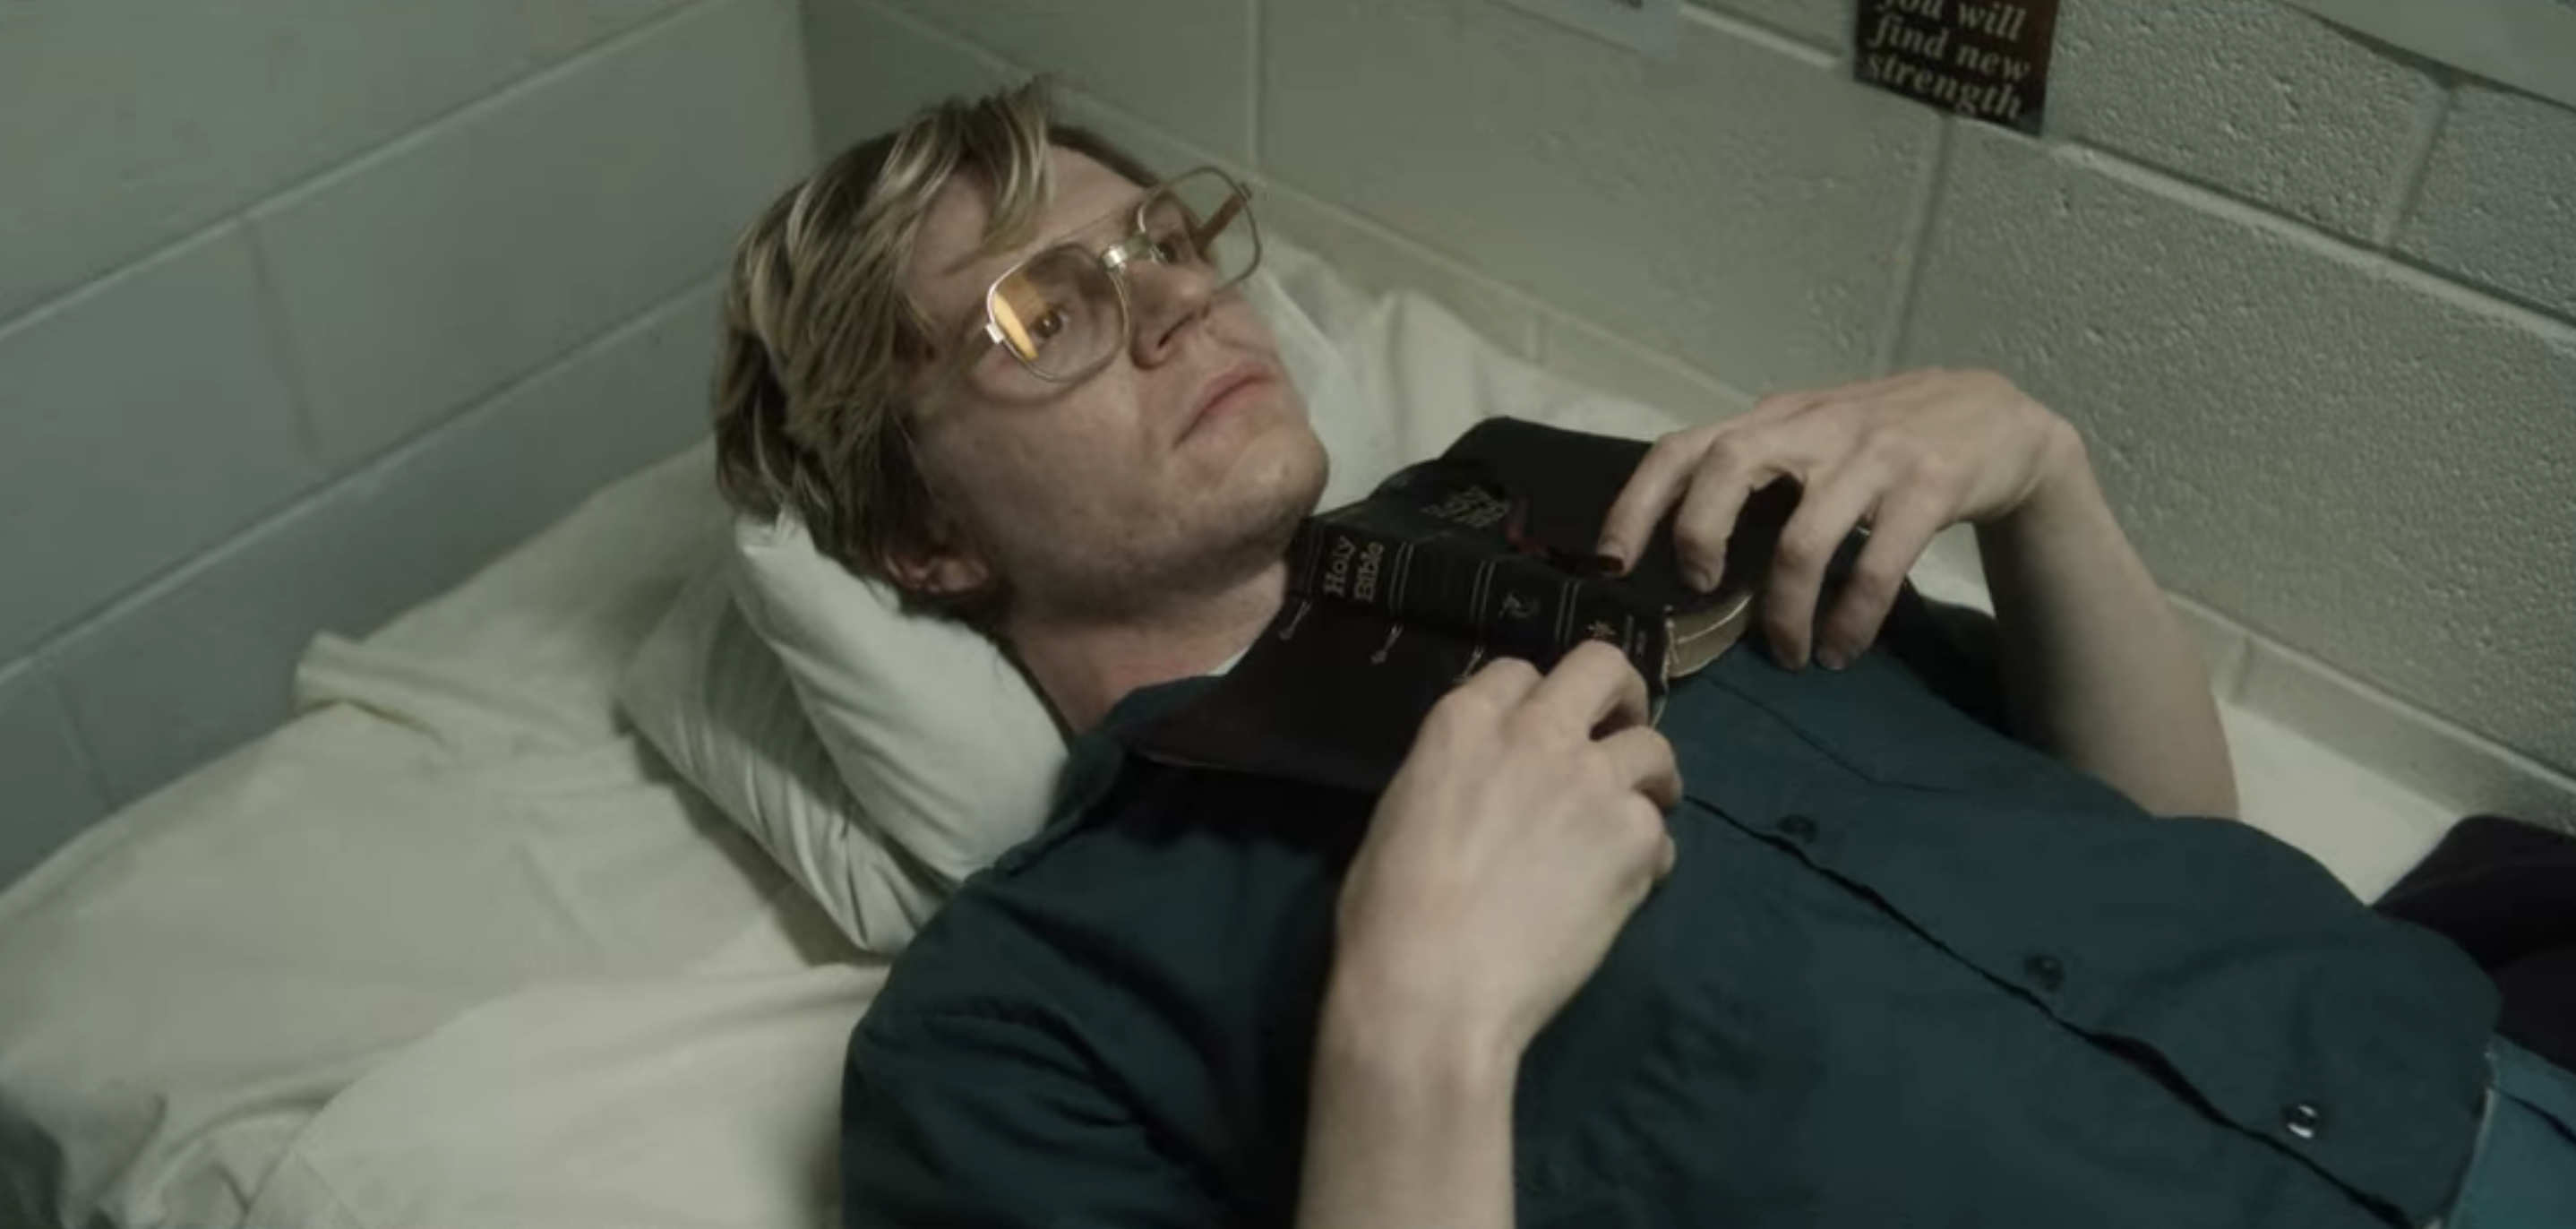 Jeffrey Dahmer: Netflix's 'exploitative' new series is reopening victims'  wounds 30 years later